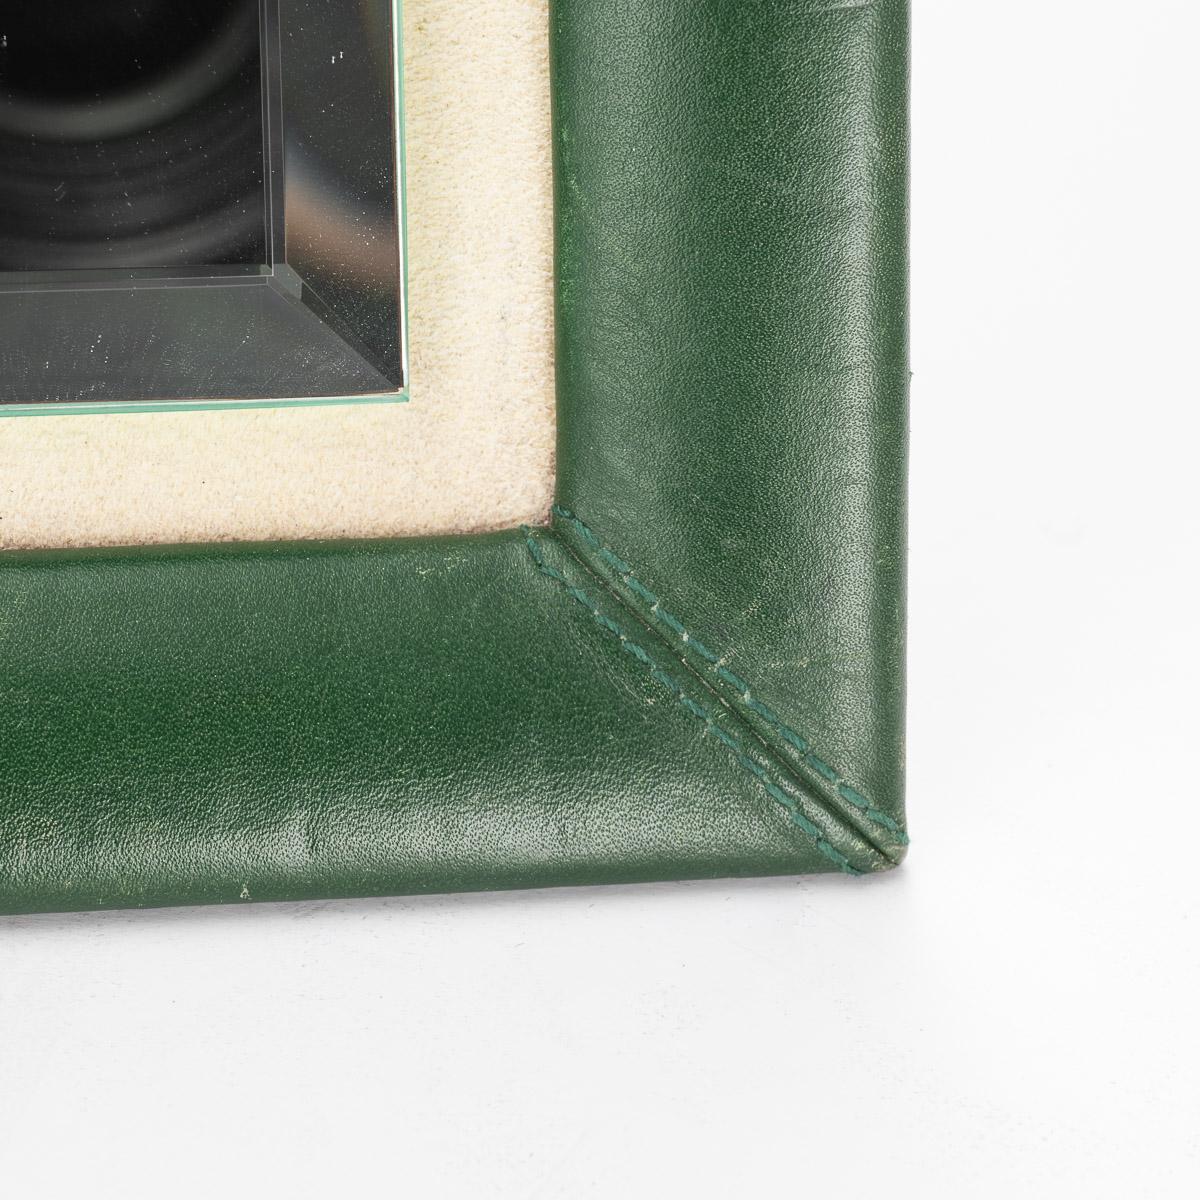 20th Century Rolex Green Leather Bound Display Mirror For Sale 3